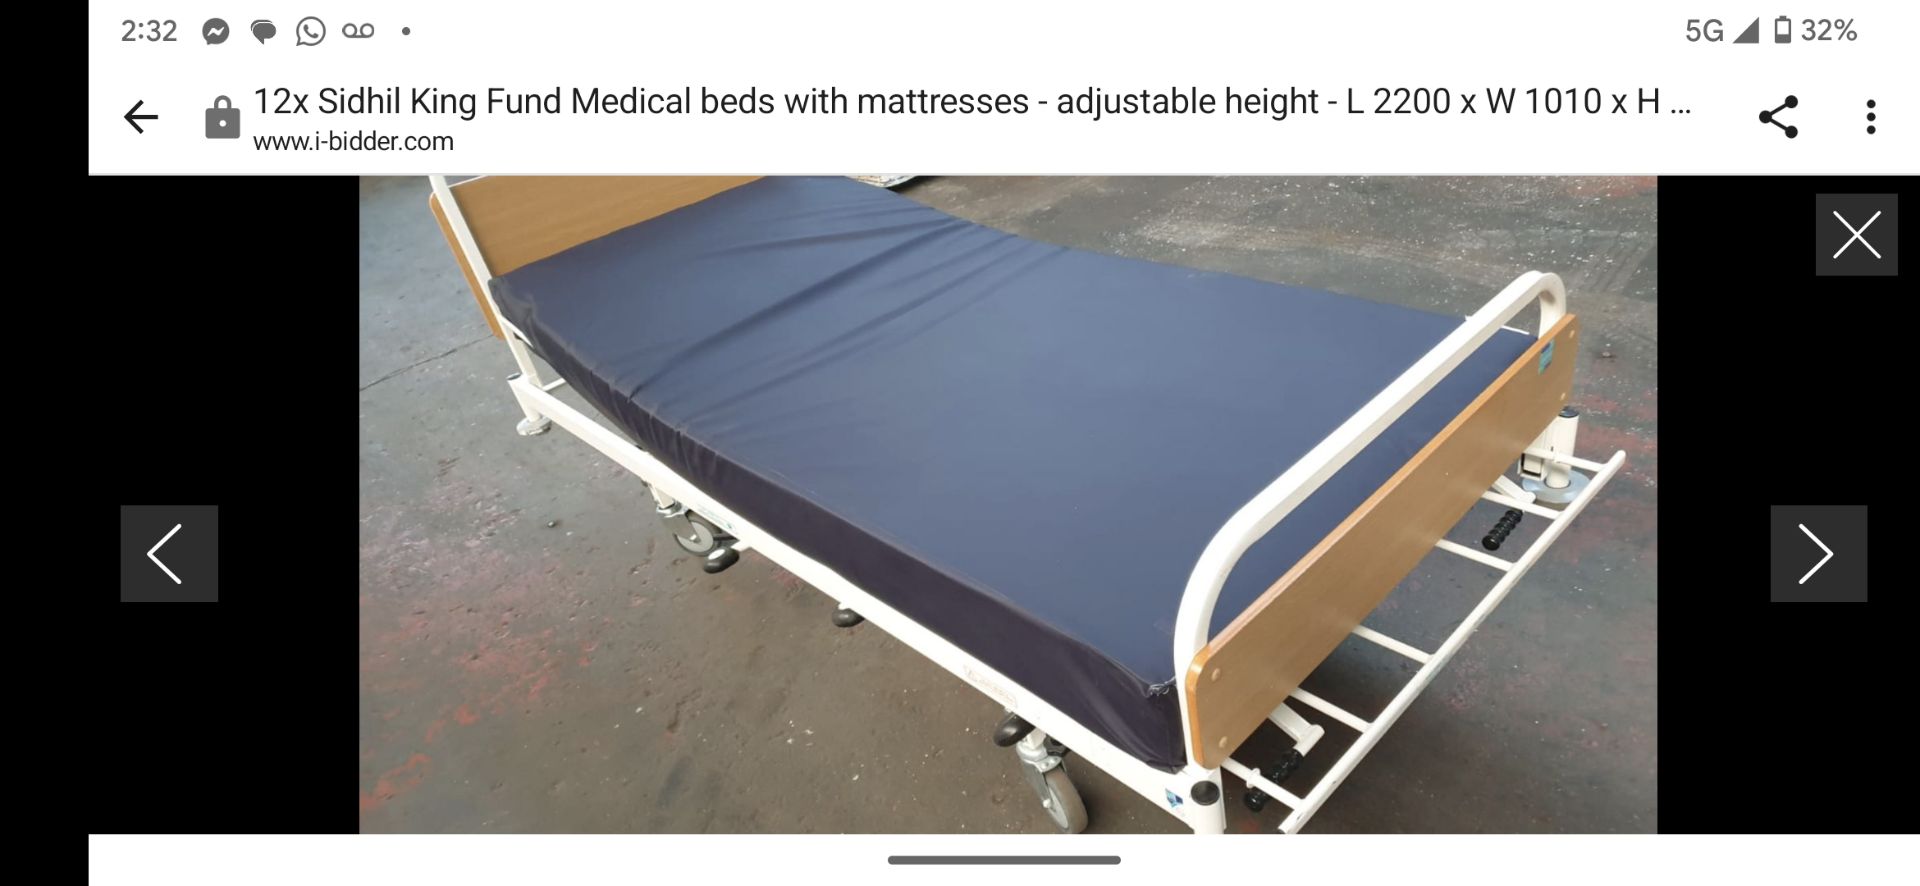 1 x Sidhil Kings Fund Hydraulic Hospital Bed With Mattress - Image 2 of 6